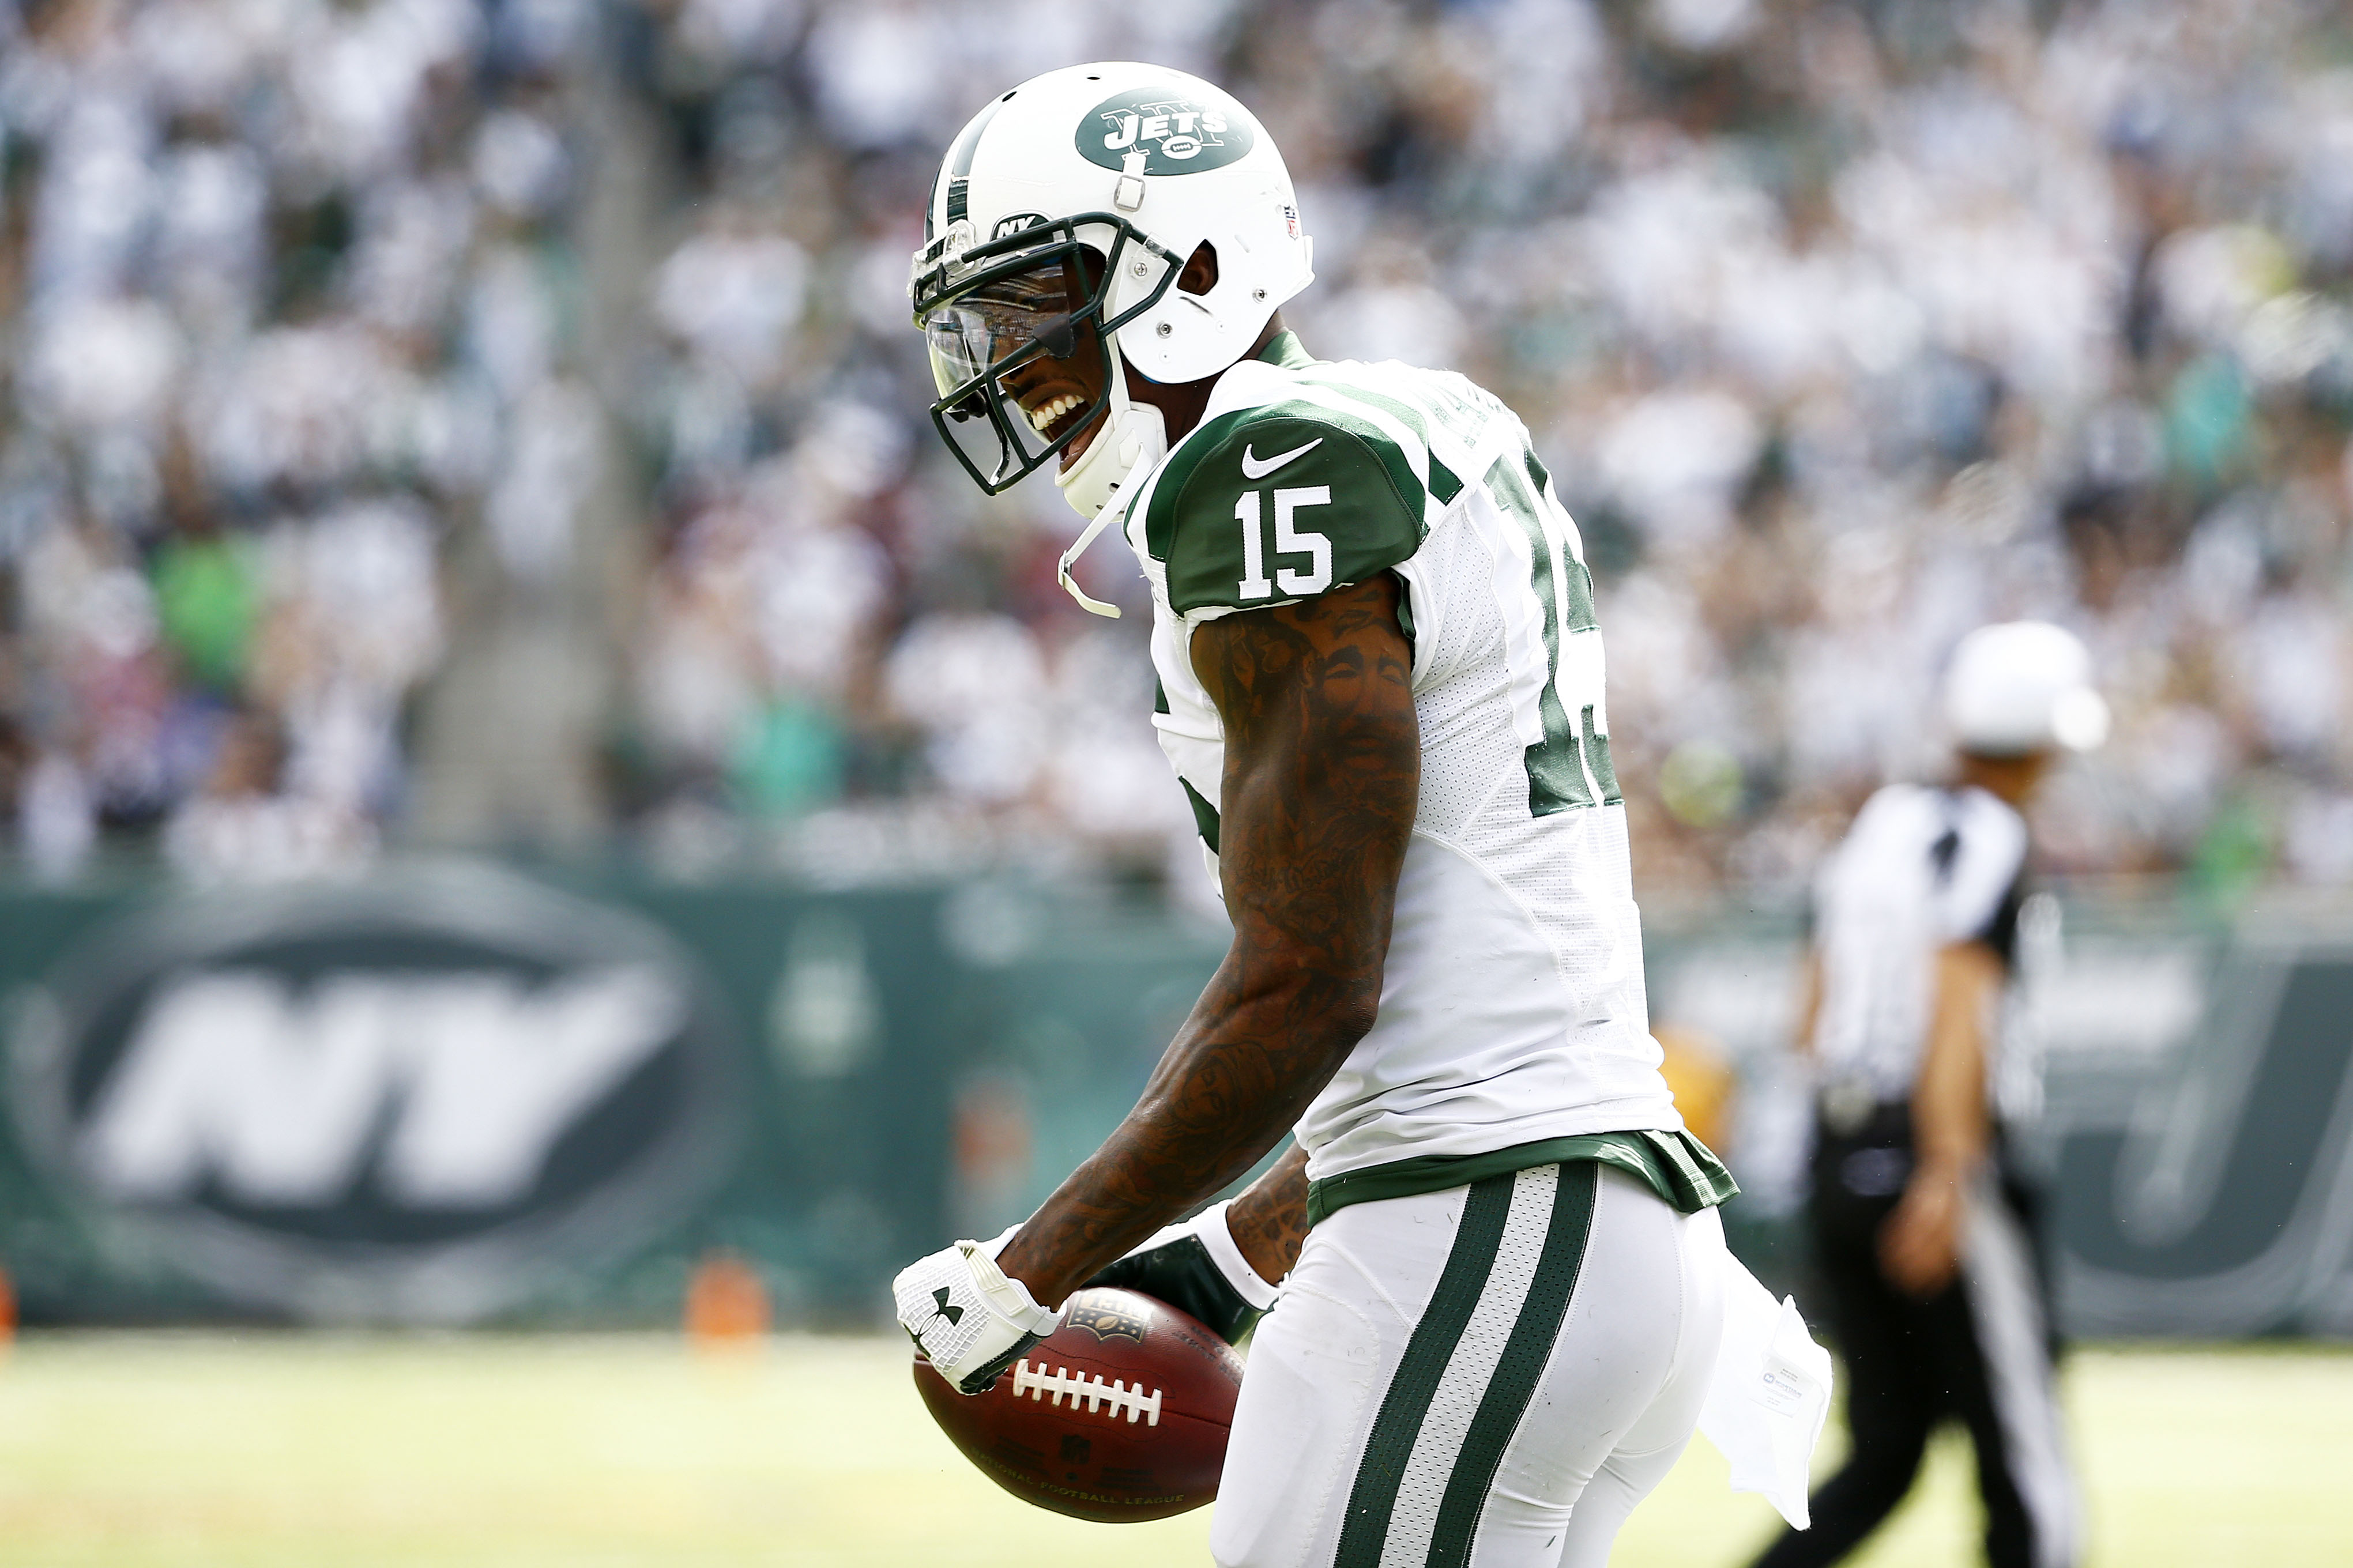 Since signing in the offseason, Brandon Marshall has made a huge impact on the Jets (Getty).